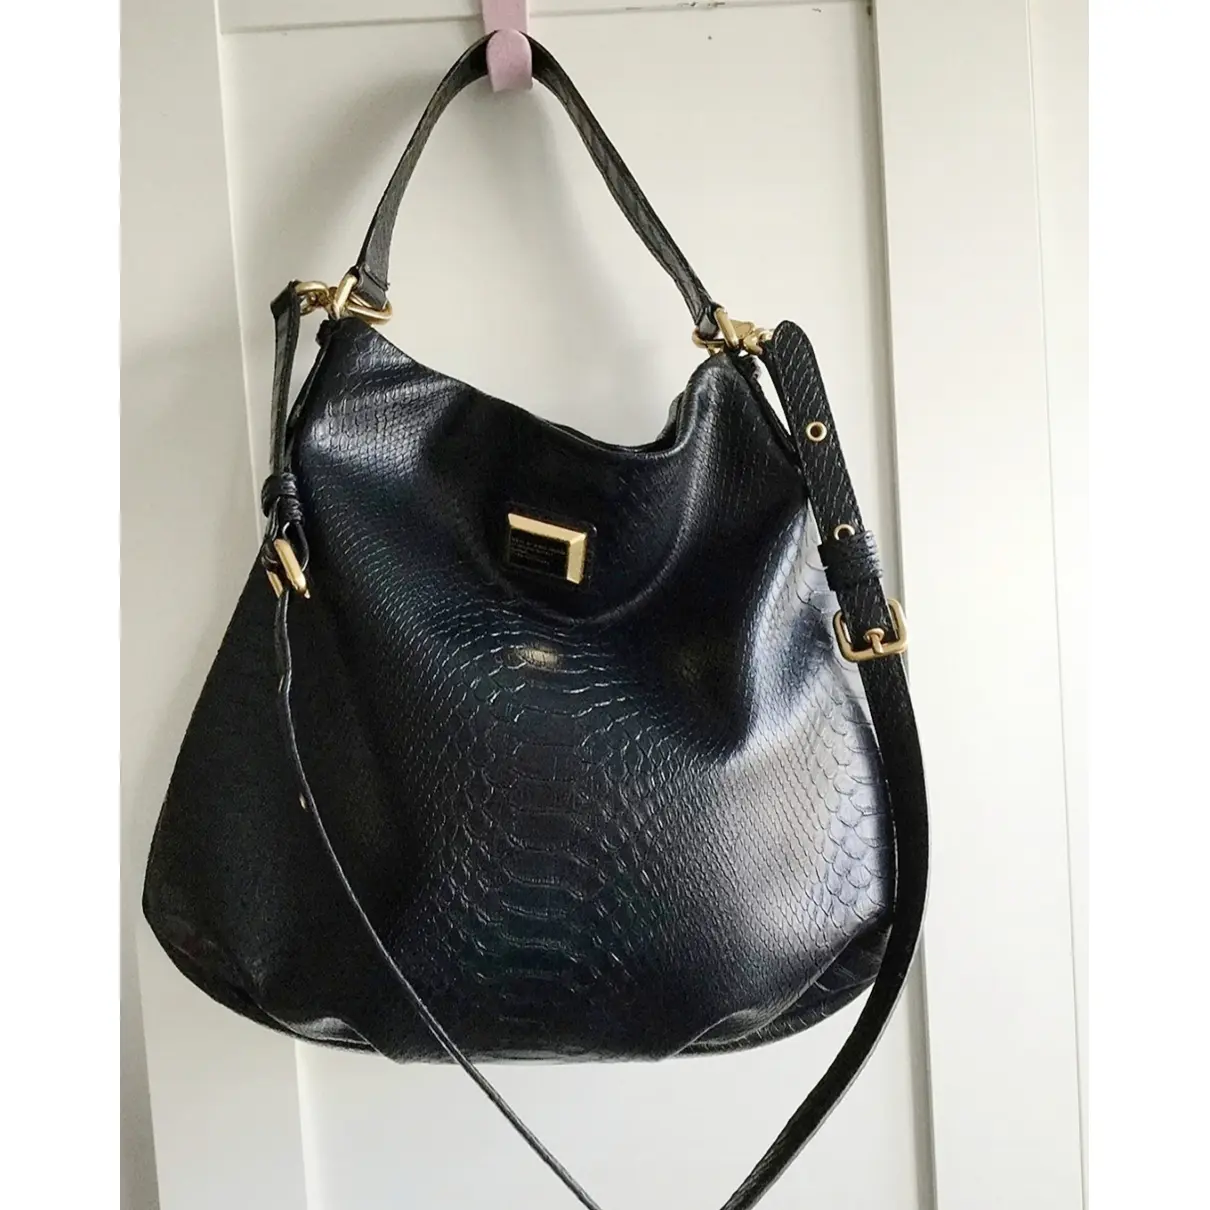 Too Hot to Handle vegan leather handbag Marc by Marc Jacobs